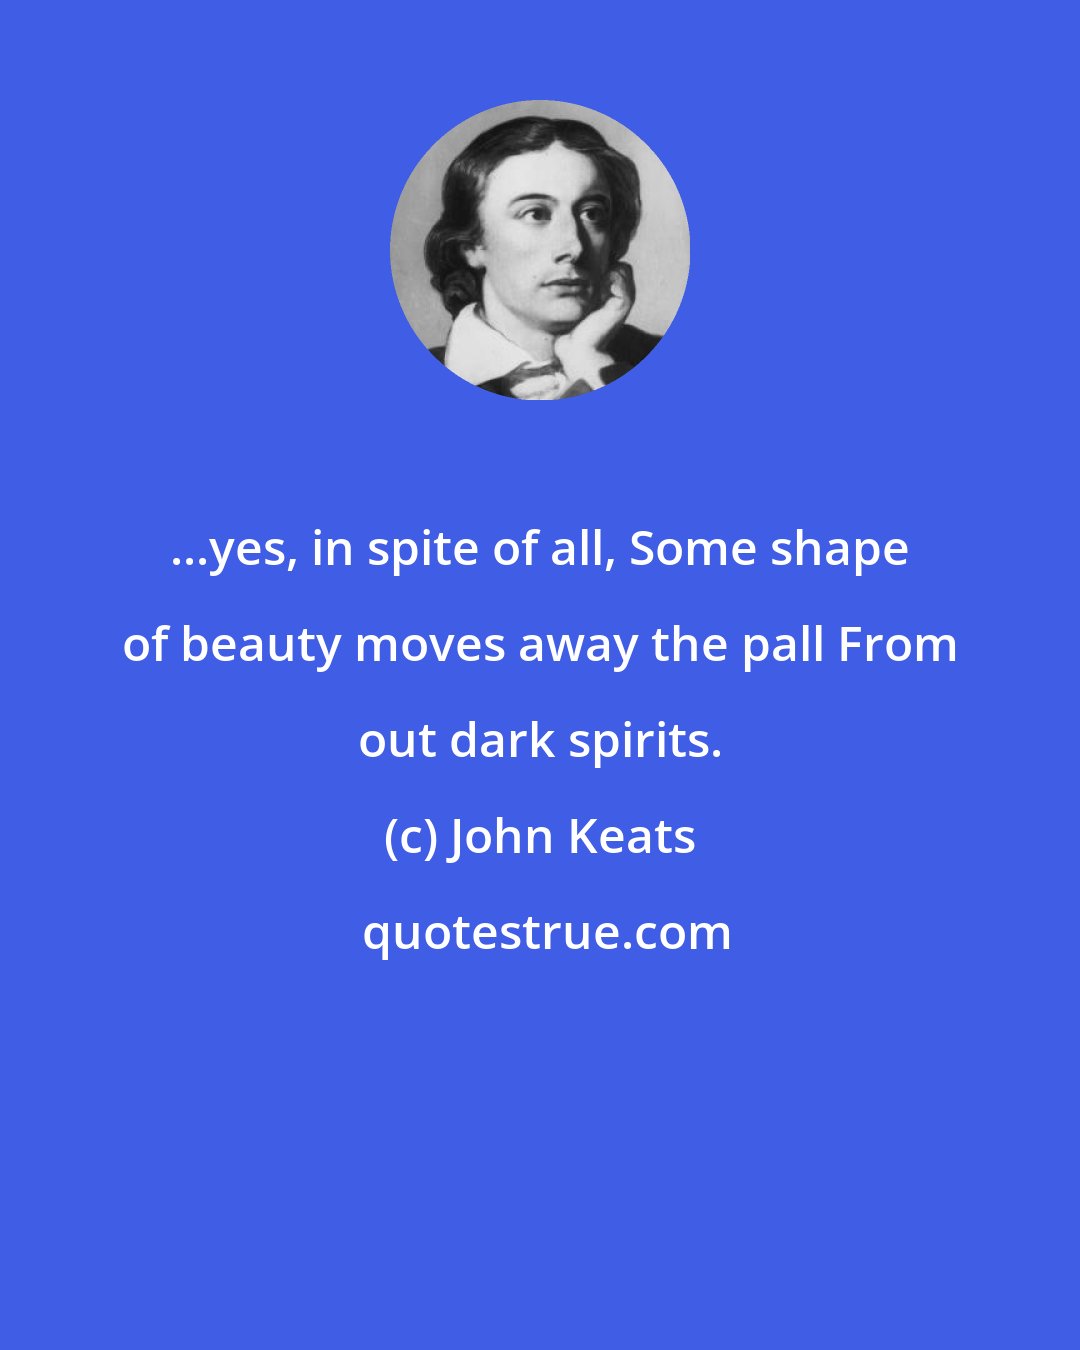 John Keats: ...yes, in spite of all, Some shape of beauty moves away the pall From out dark spirits.